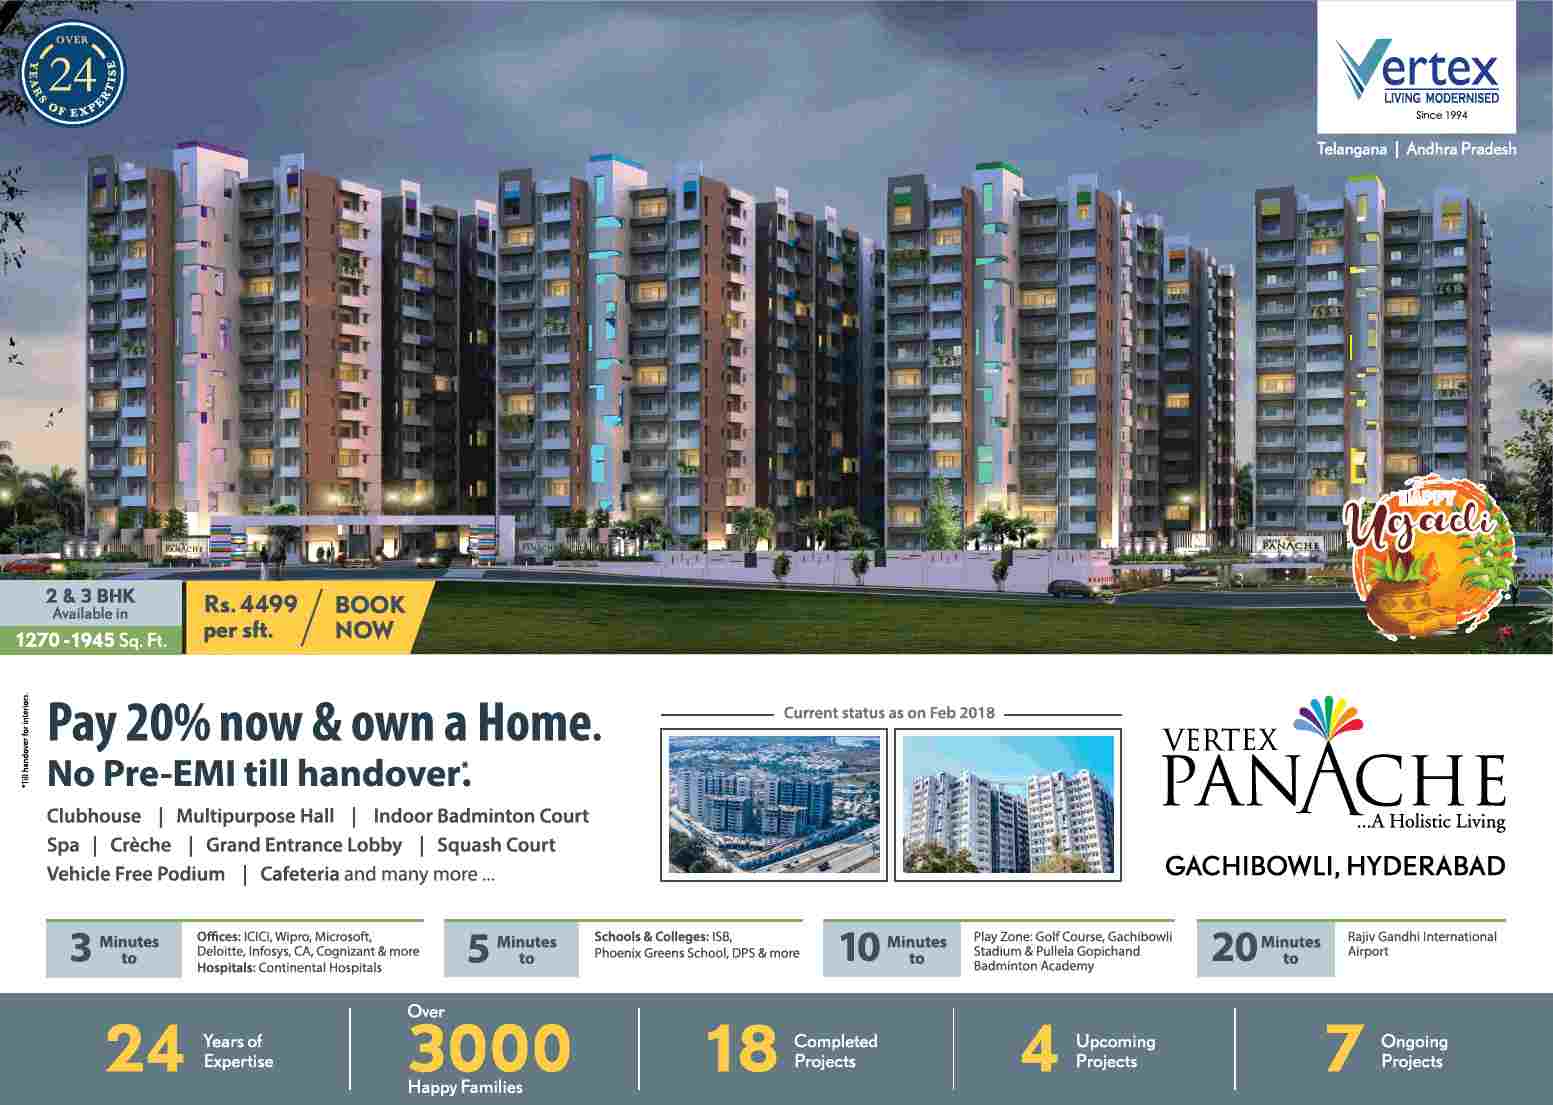 Pay 20% now & own a home with pre-EMI offer till handover at Vertex Panache in Hyderabad Update